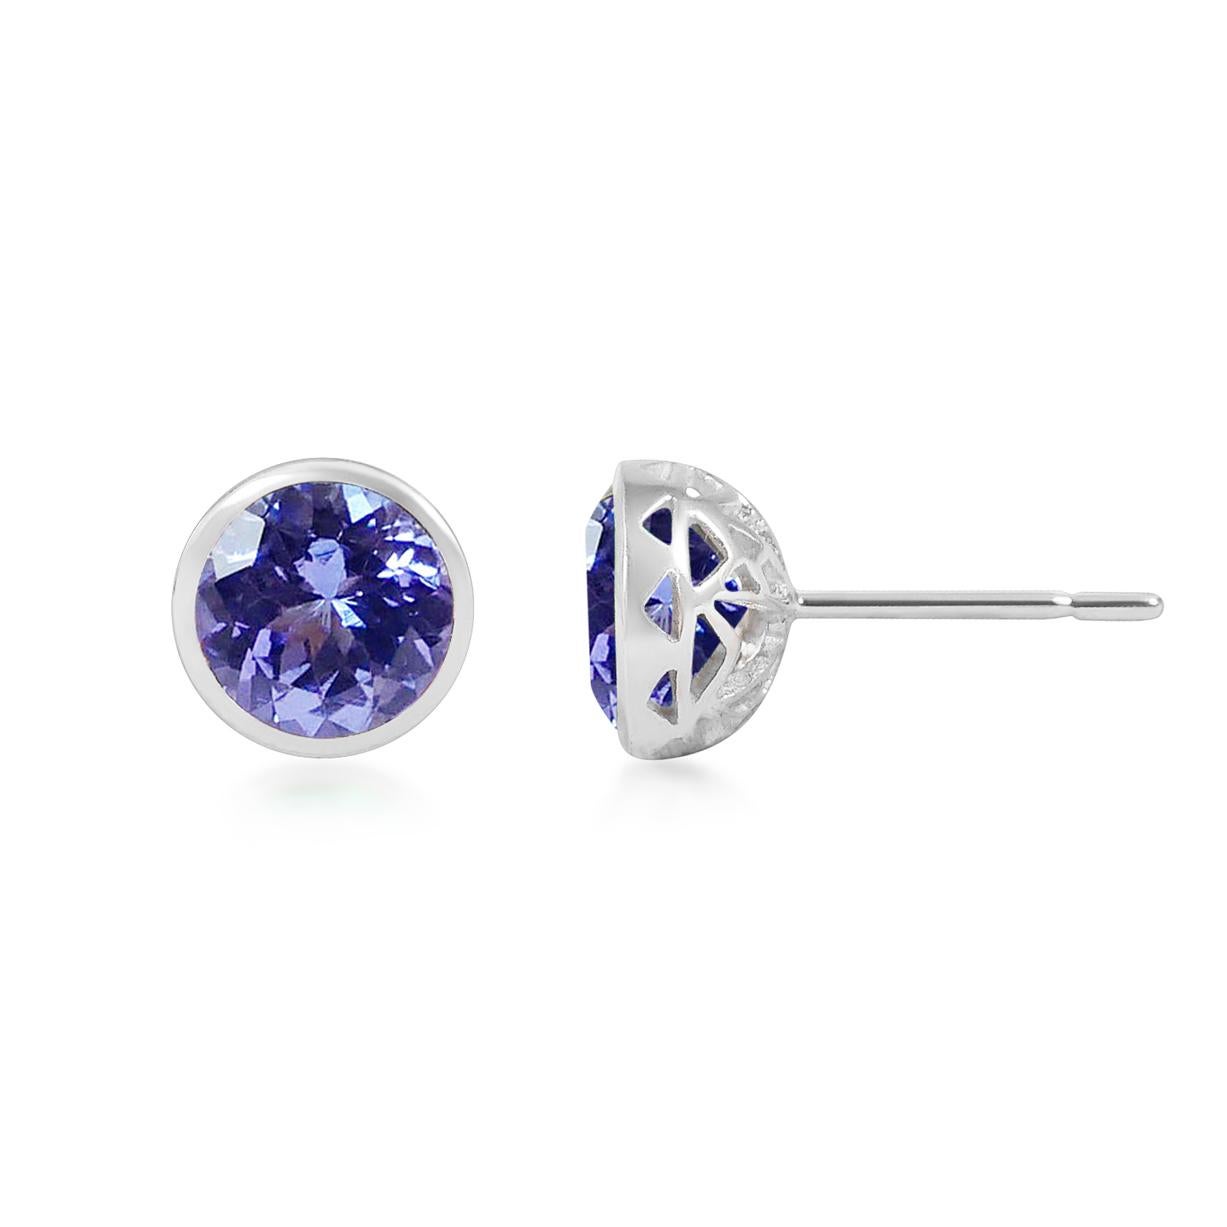 Handcrafted 2.80 Carats Tanzanite 18 Karat White Gold Stud Earrings. The 8mm natural stones are set in our iconic hand pierced gold lace to let the light through our precious and fine stones our earrings are the perfect everyday wear.

This unique